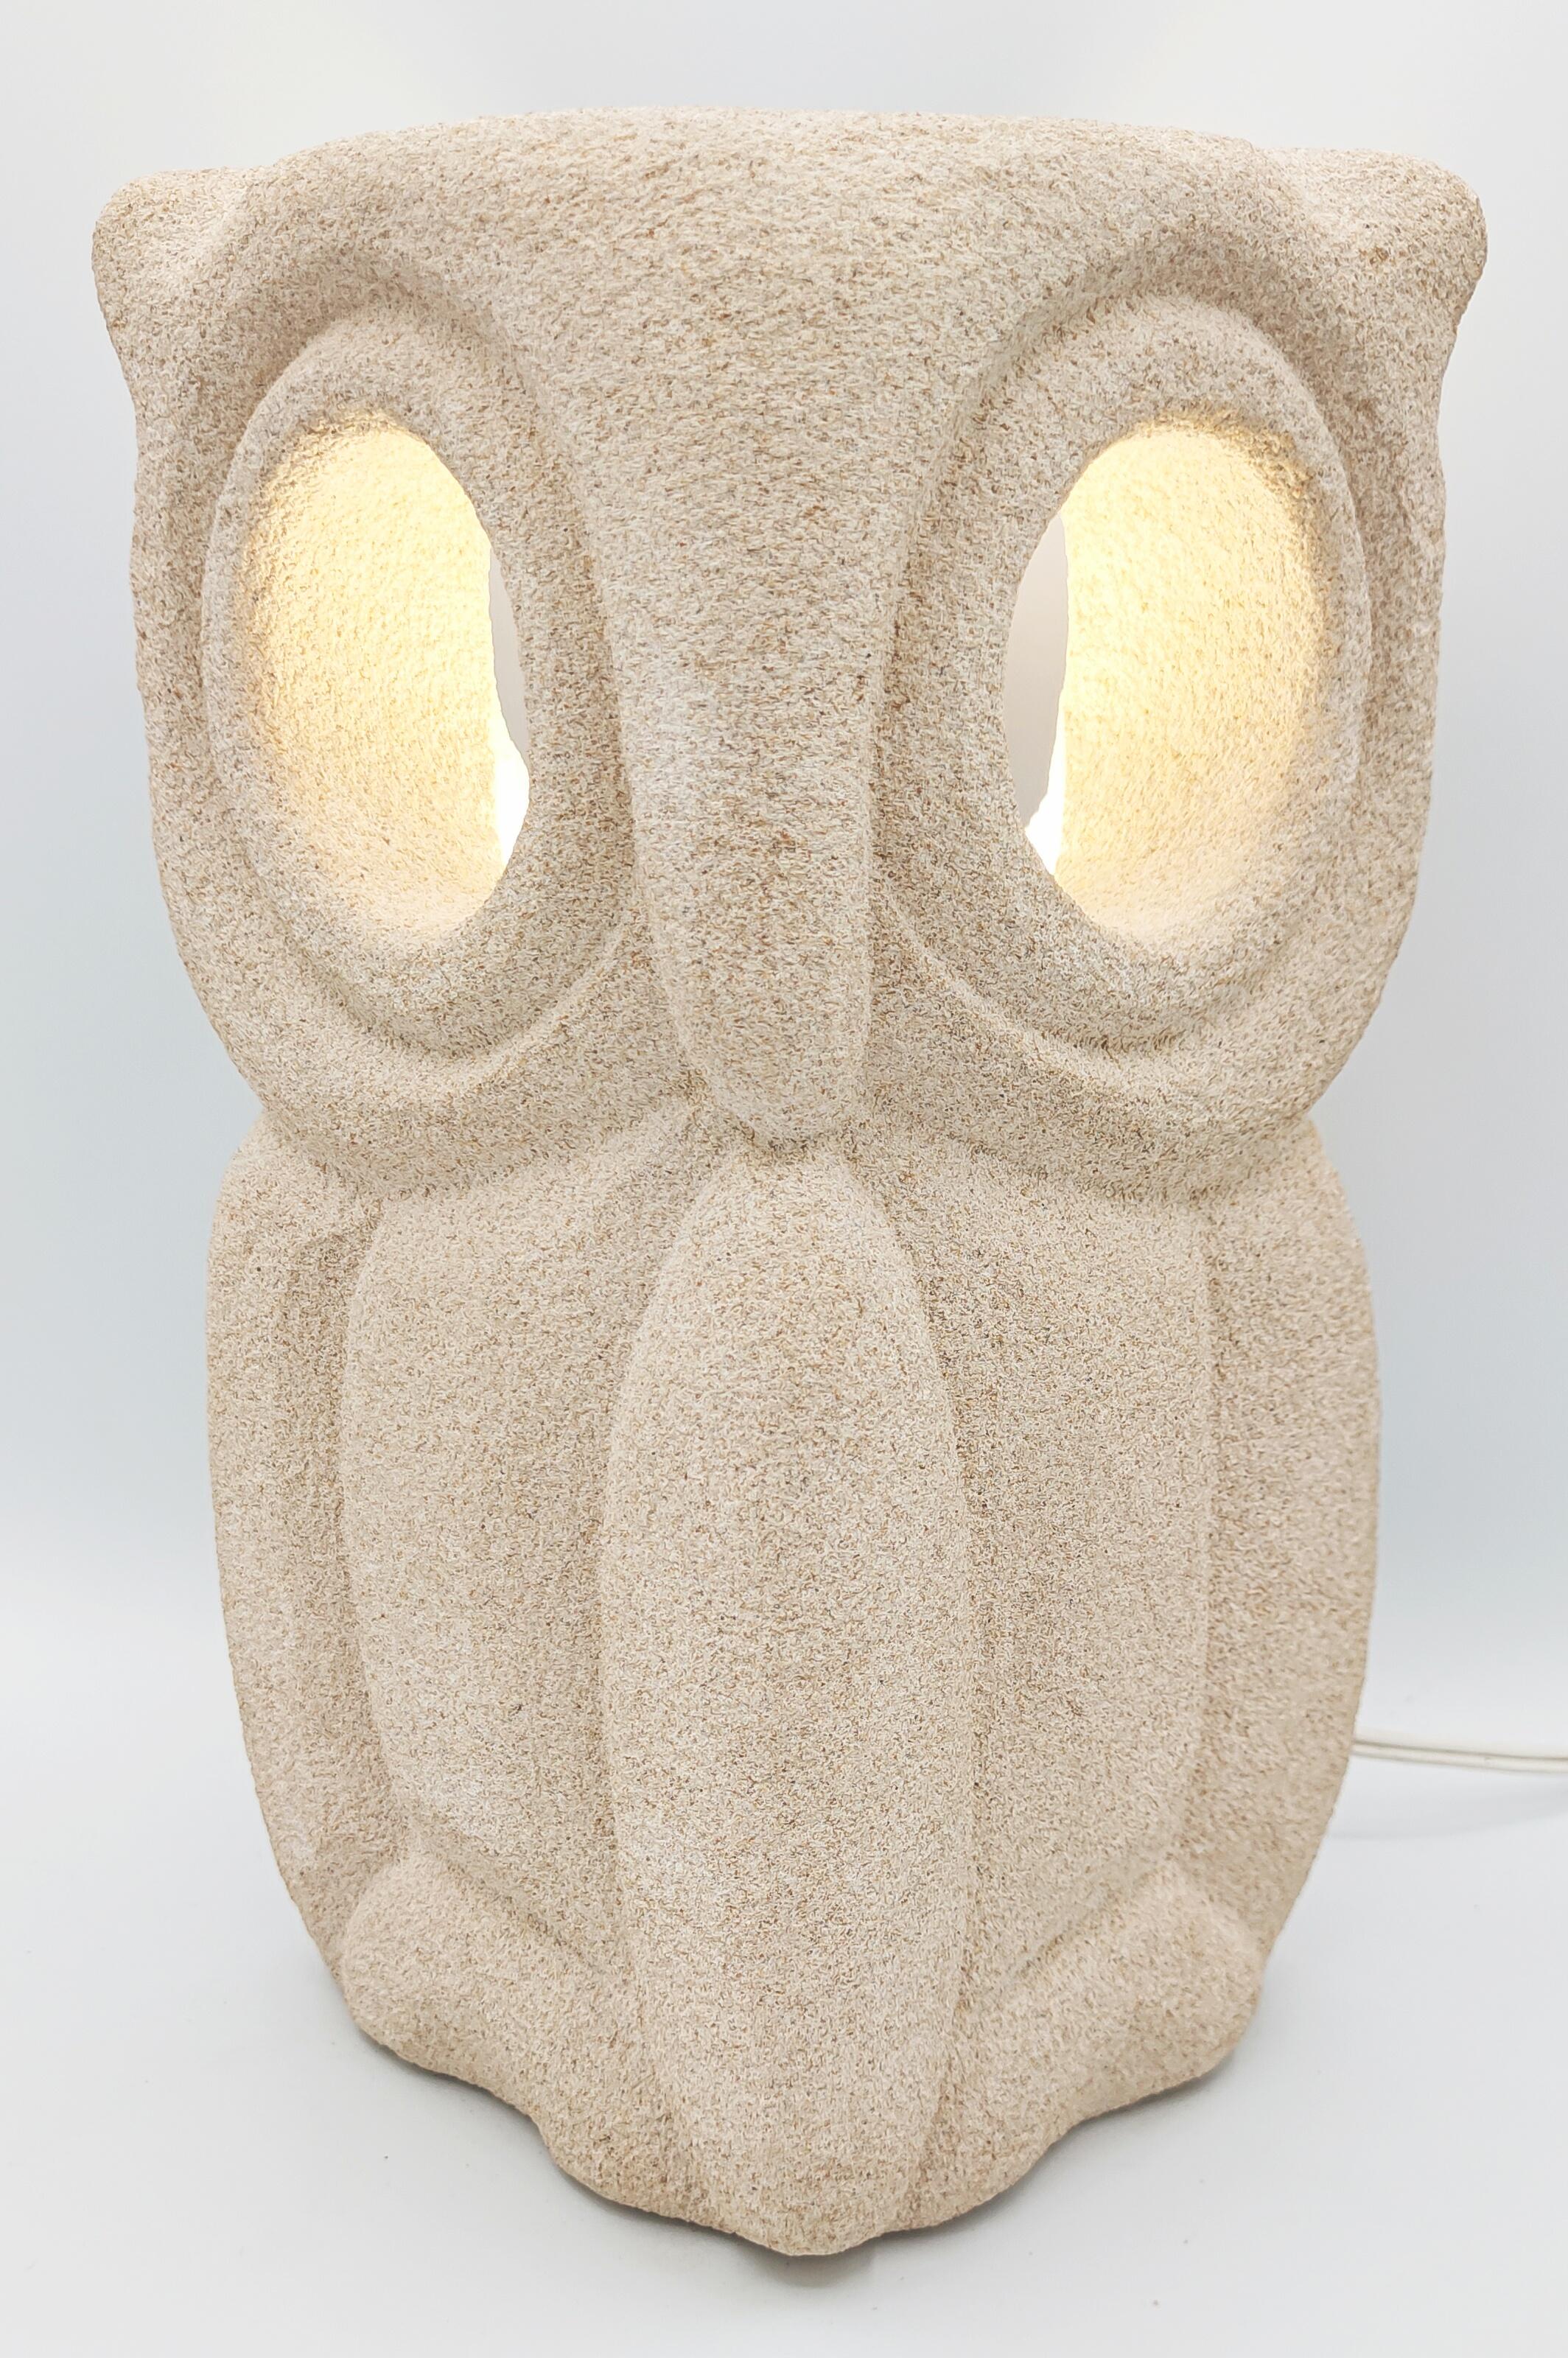 Stone Albert Tormos Owl Table Lamp, France 1970s For Sale